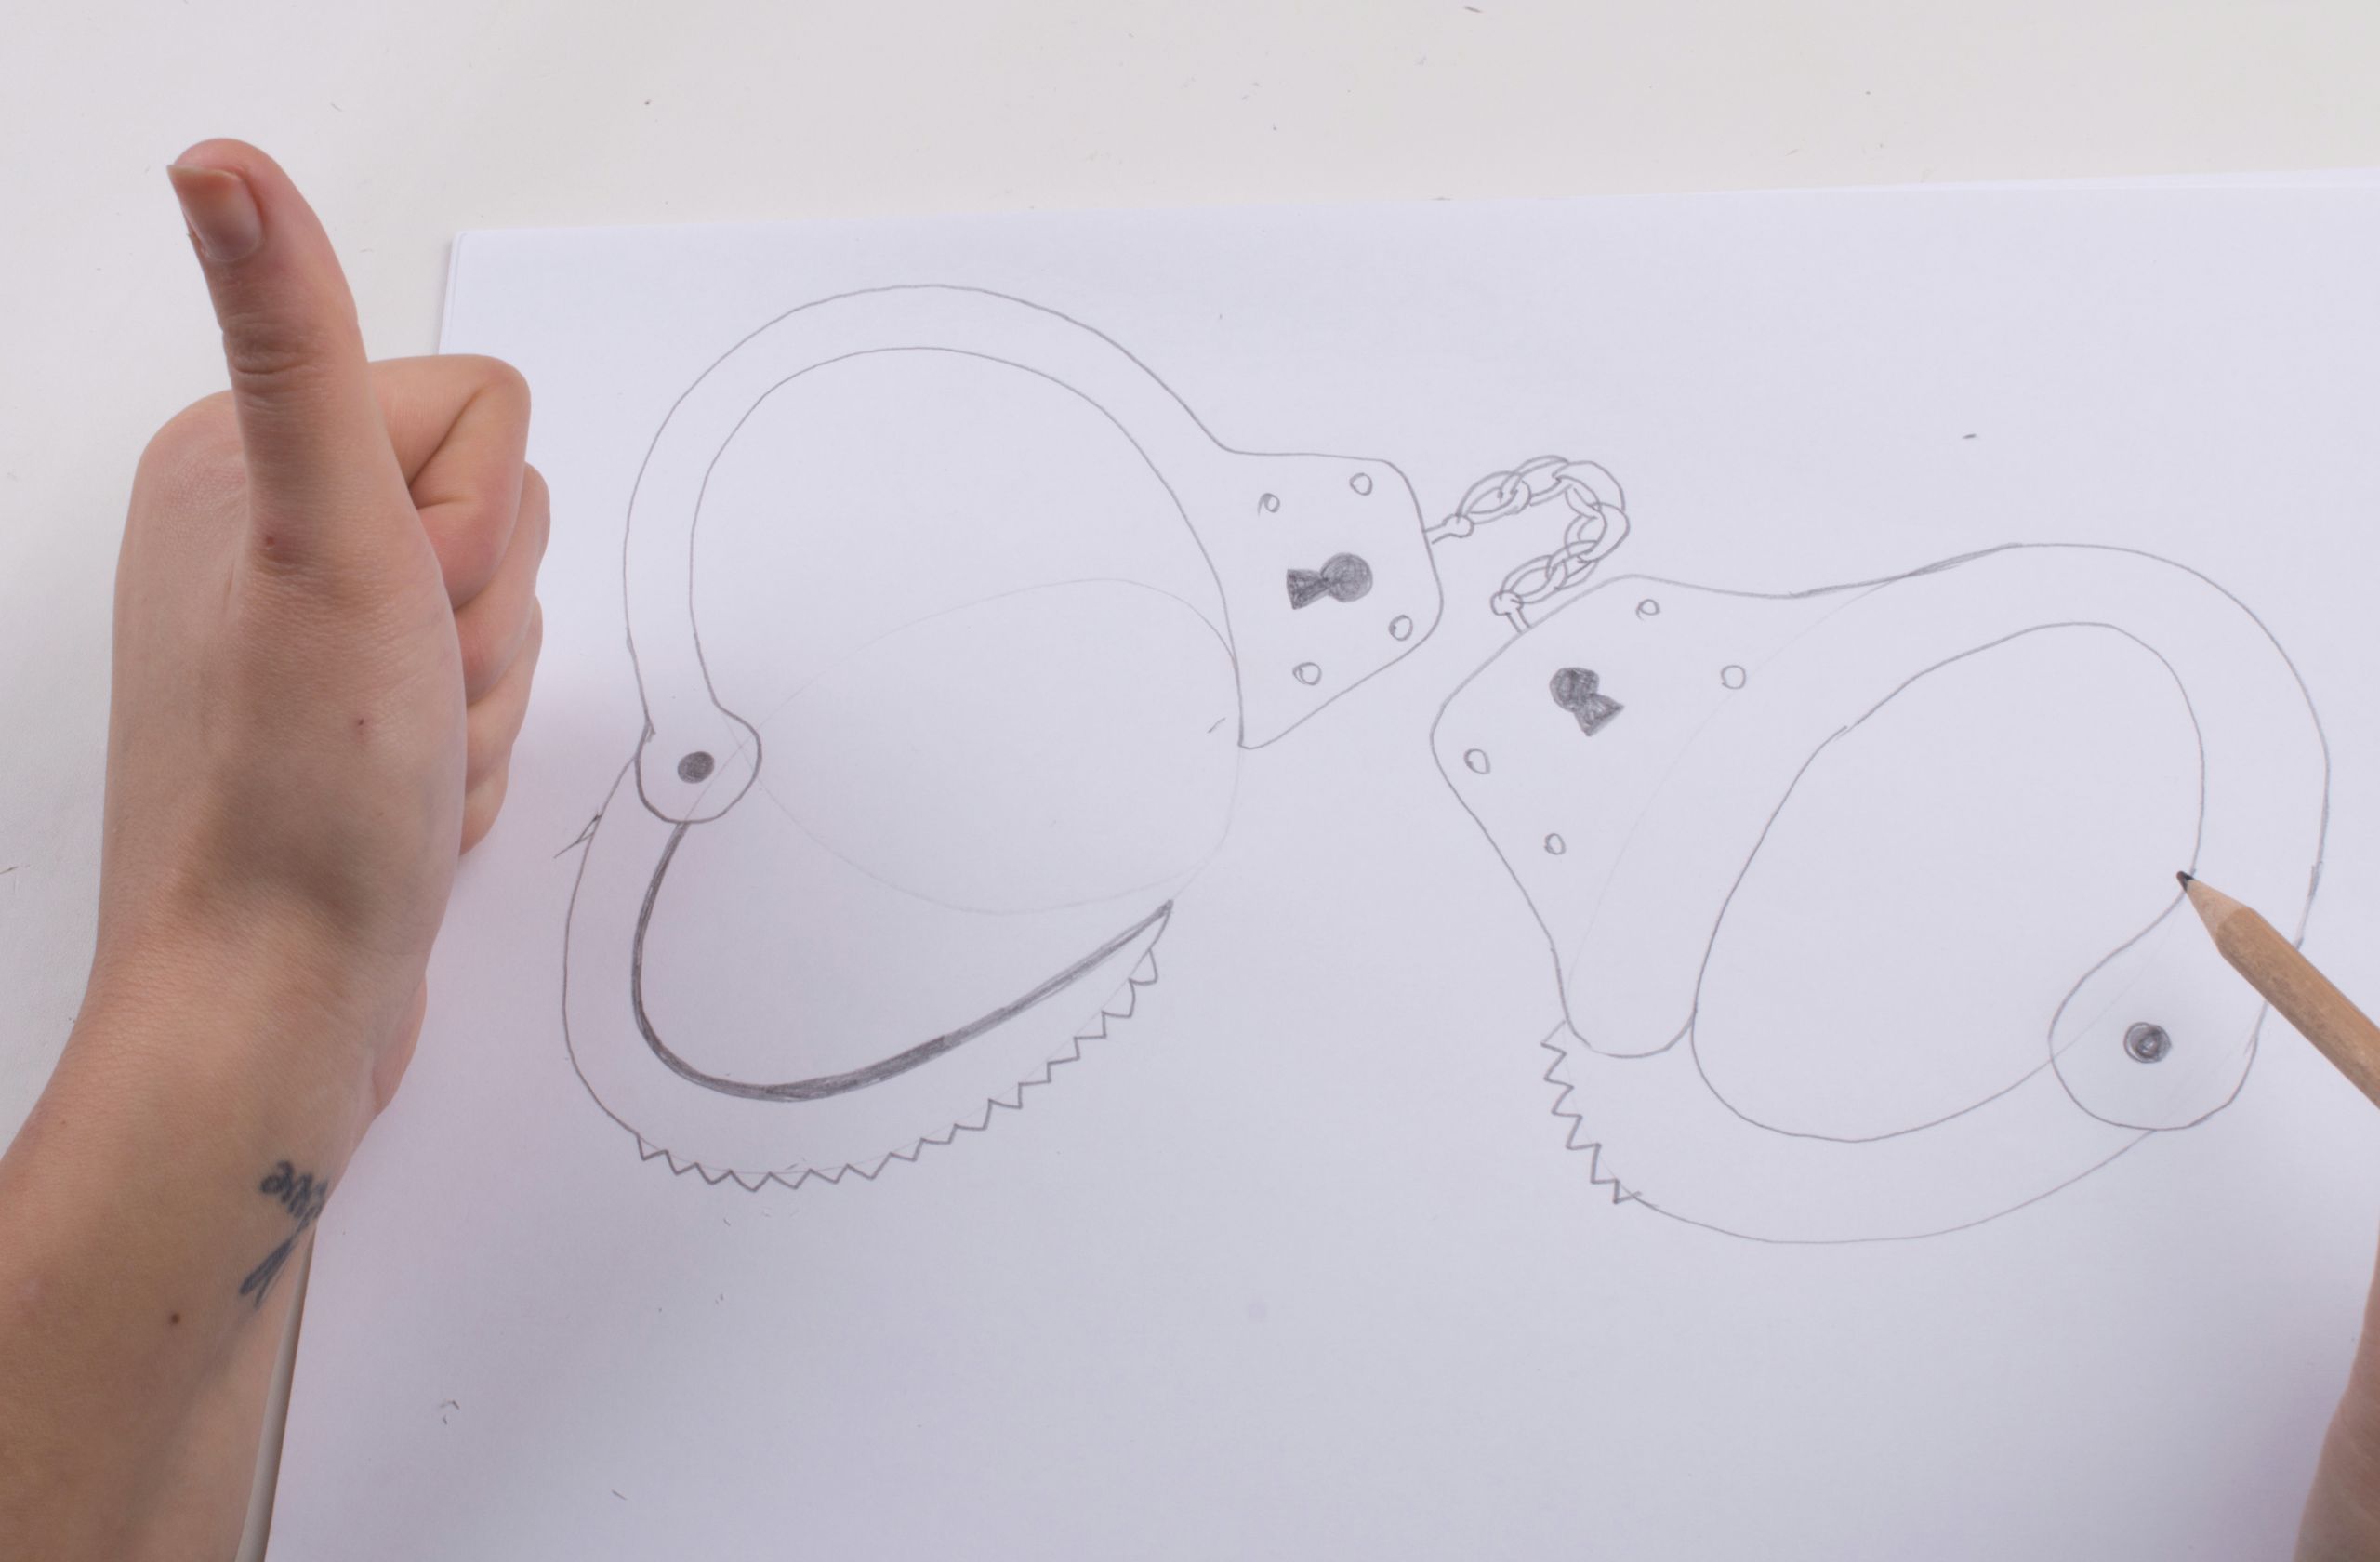 Handcuffs Drawing Easy How to Draw Empty Handcuffs with Pictures Wikihow